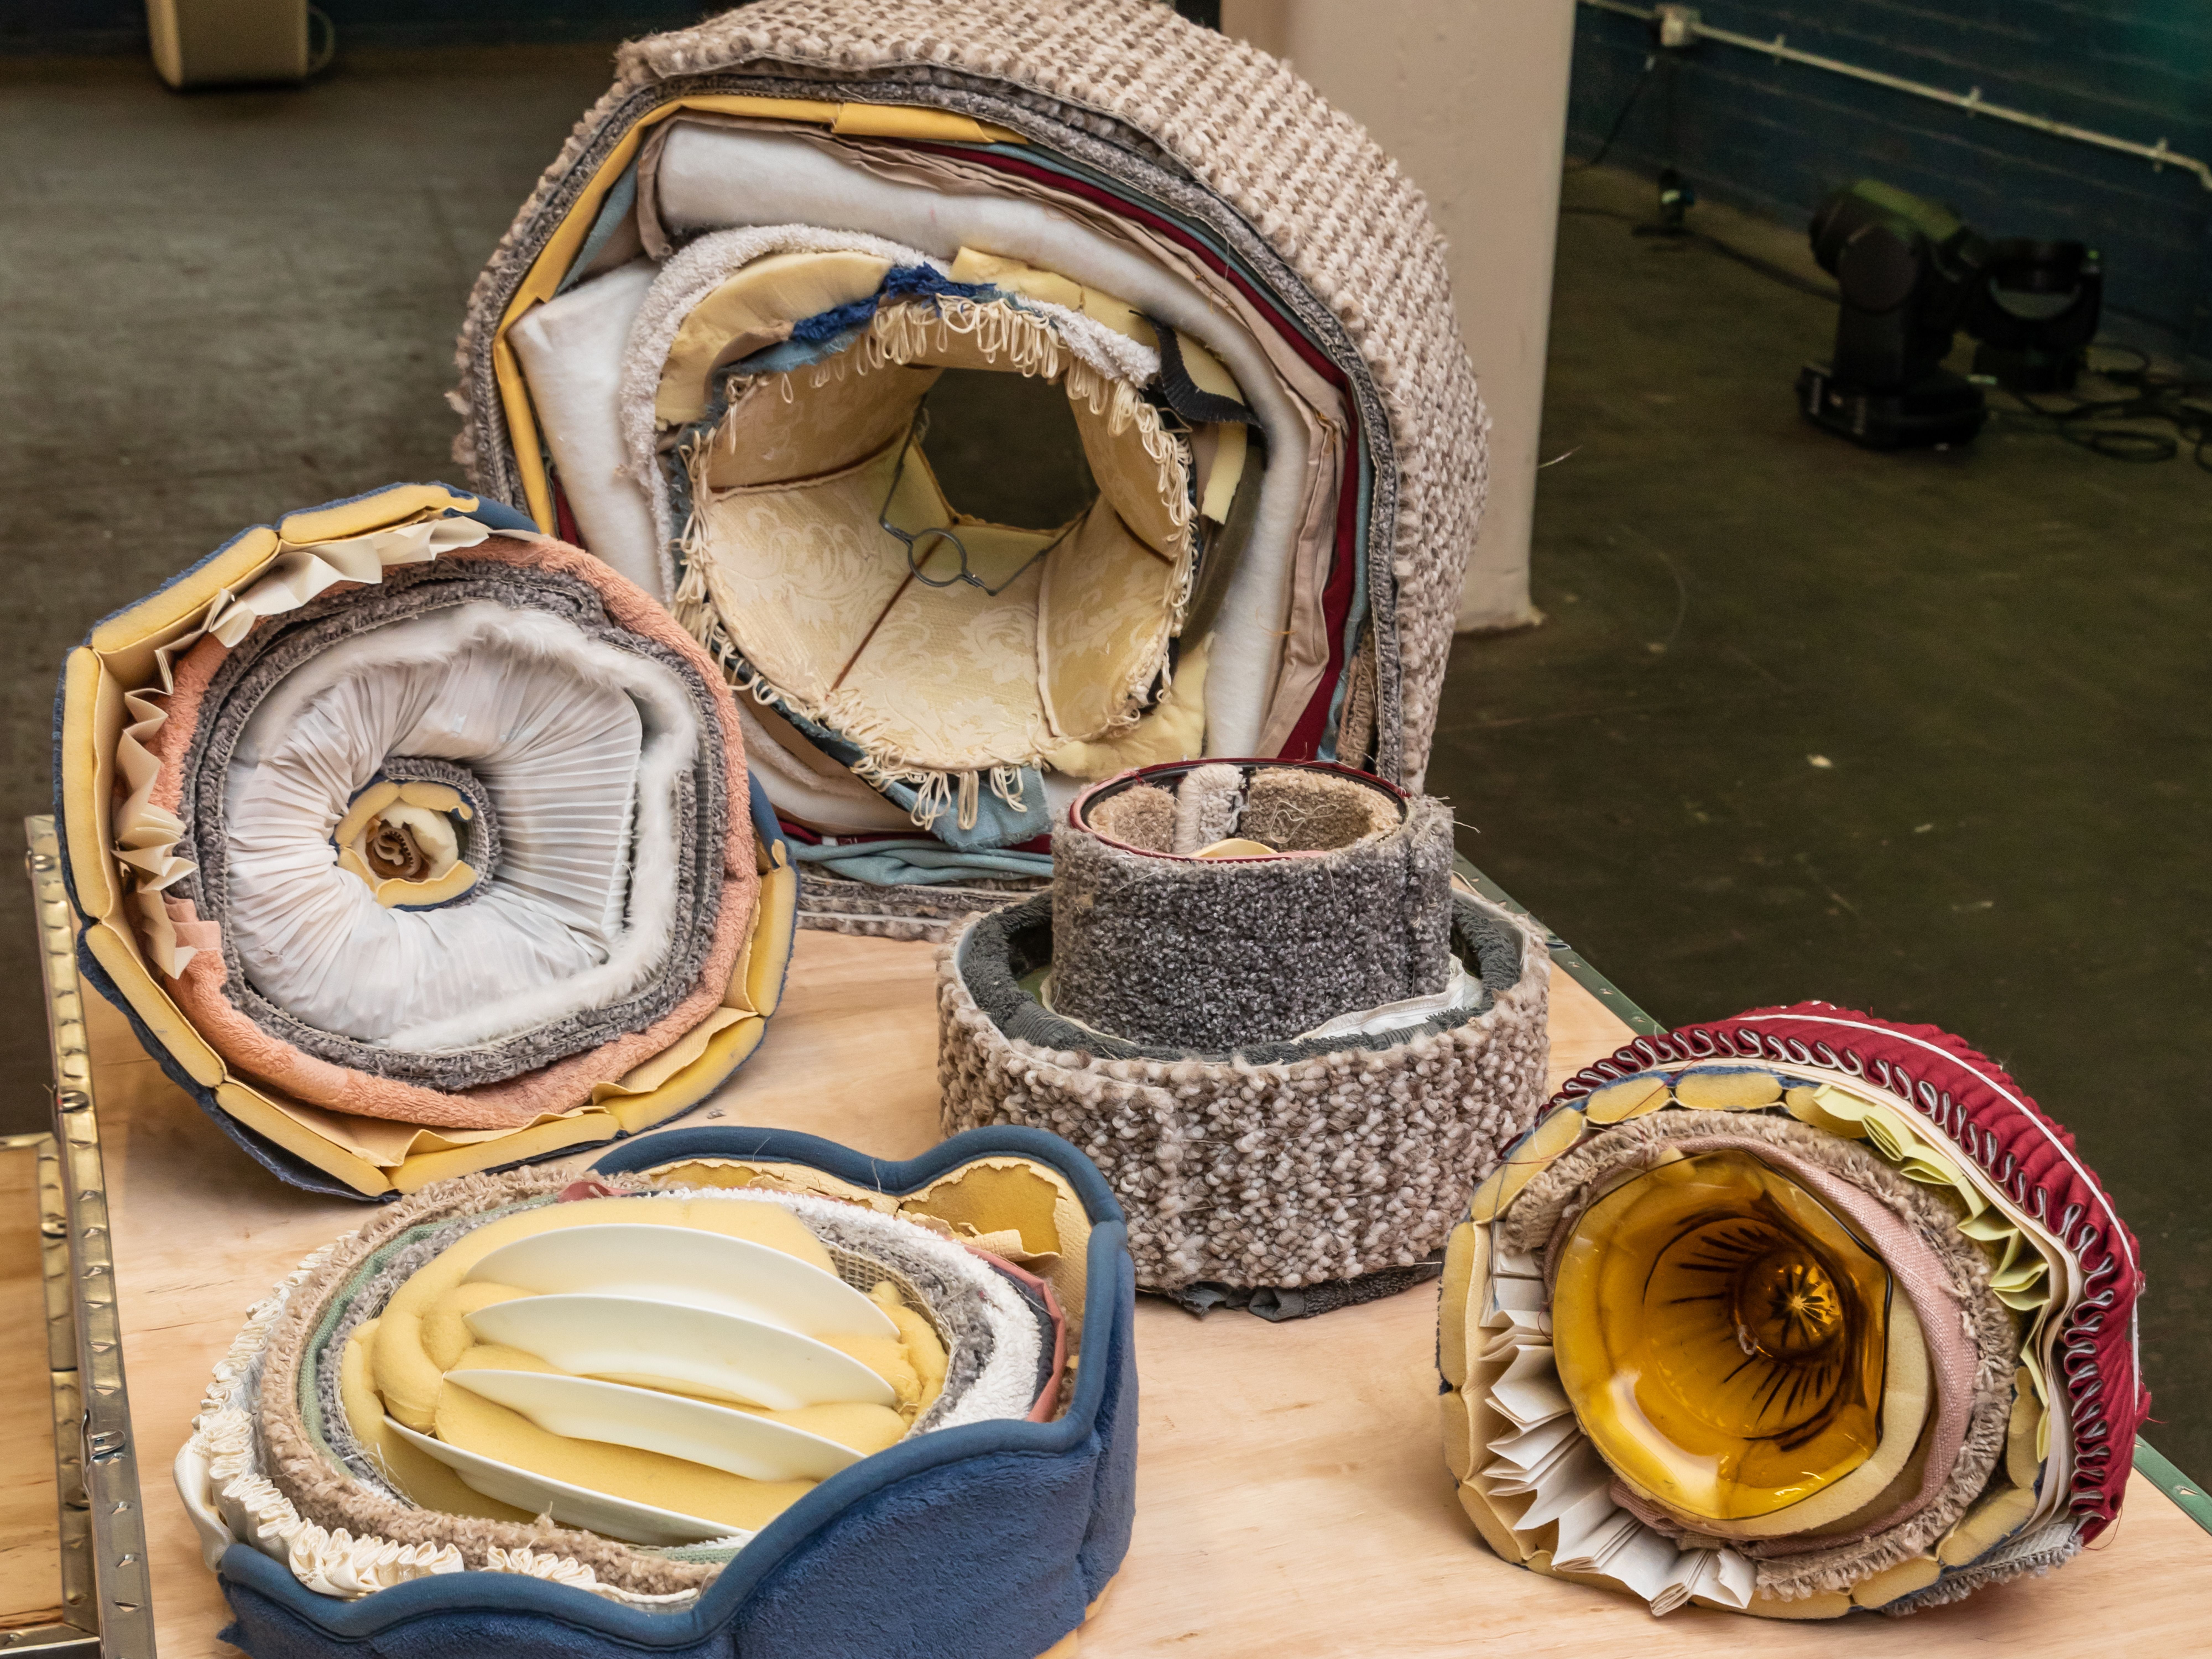 'Unwanted objects' By Martha Dommett. A collection of soft sculptures created completely out of discarded materials on exhibition at Origins Creative Arts Festival 2019